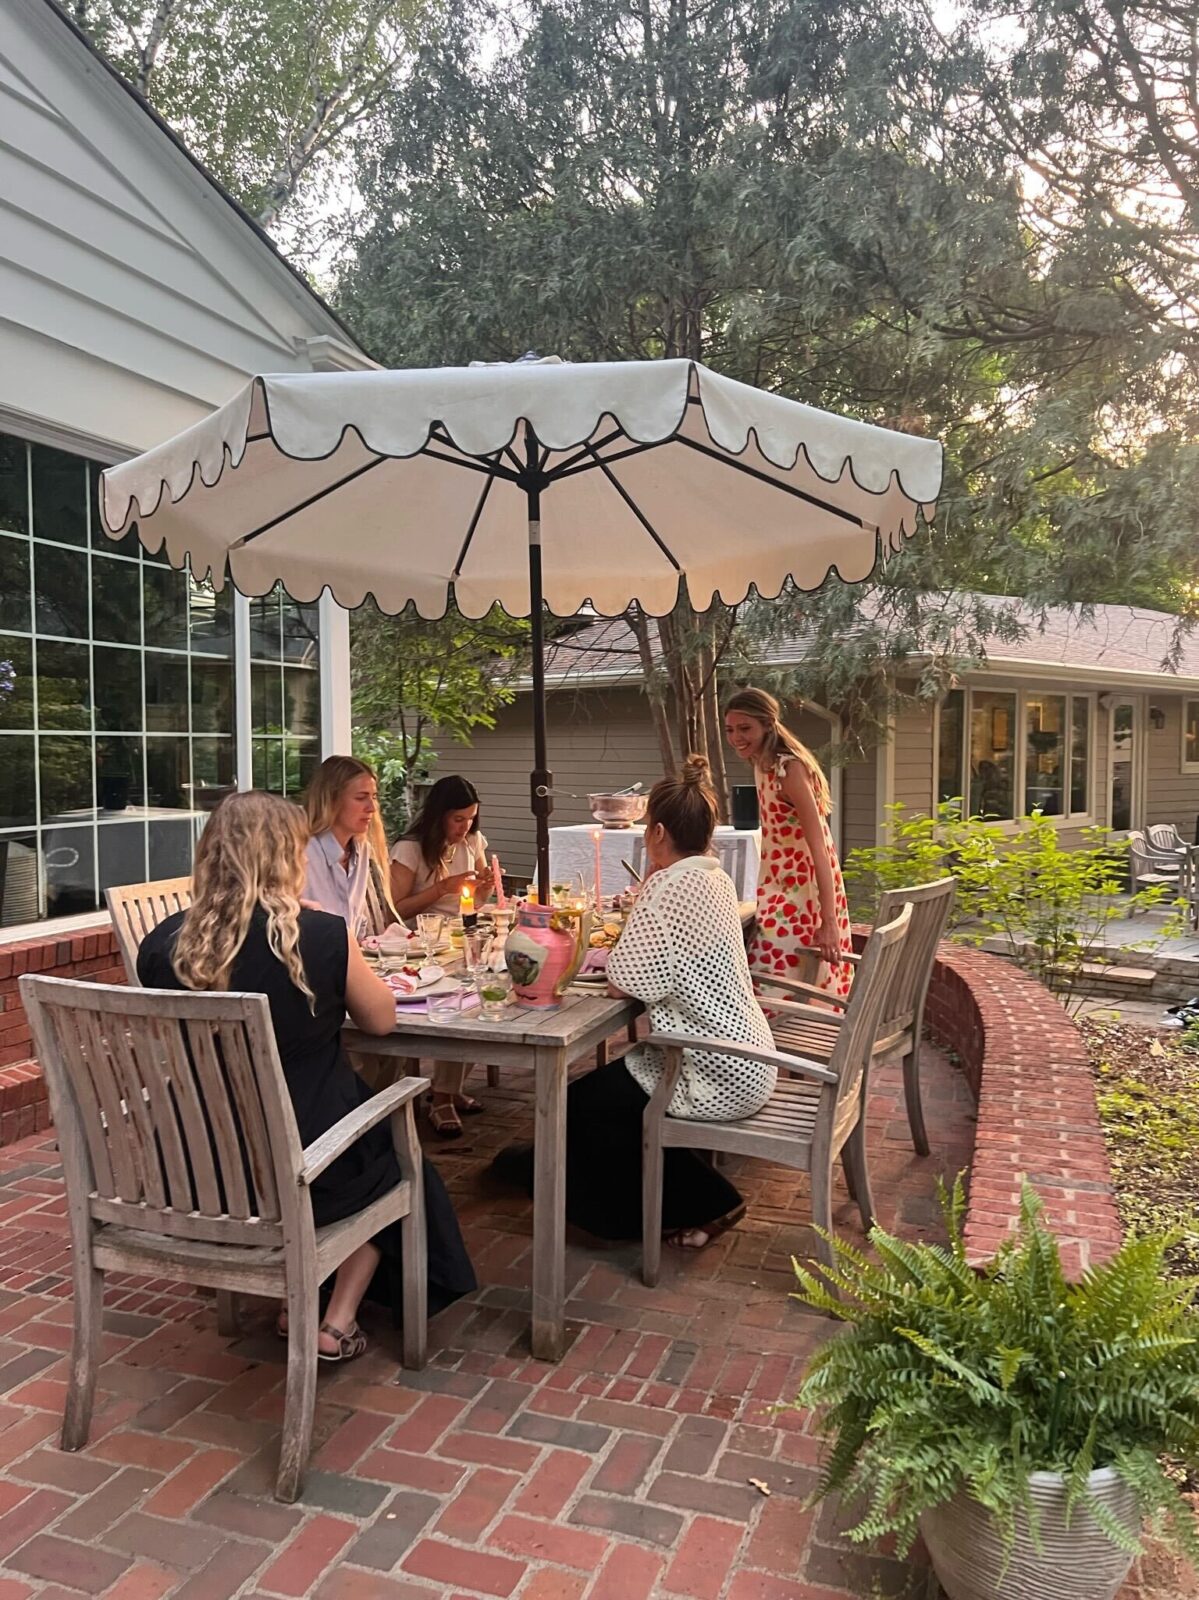 Friends are seated at an outdoor dining table for dinner on a summer evening